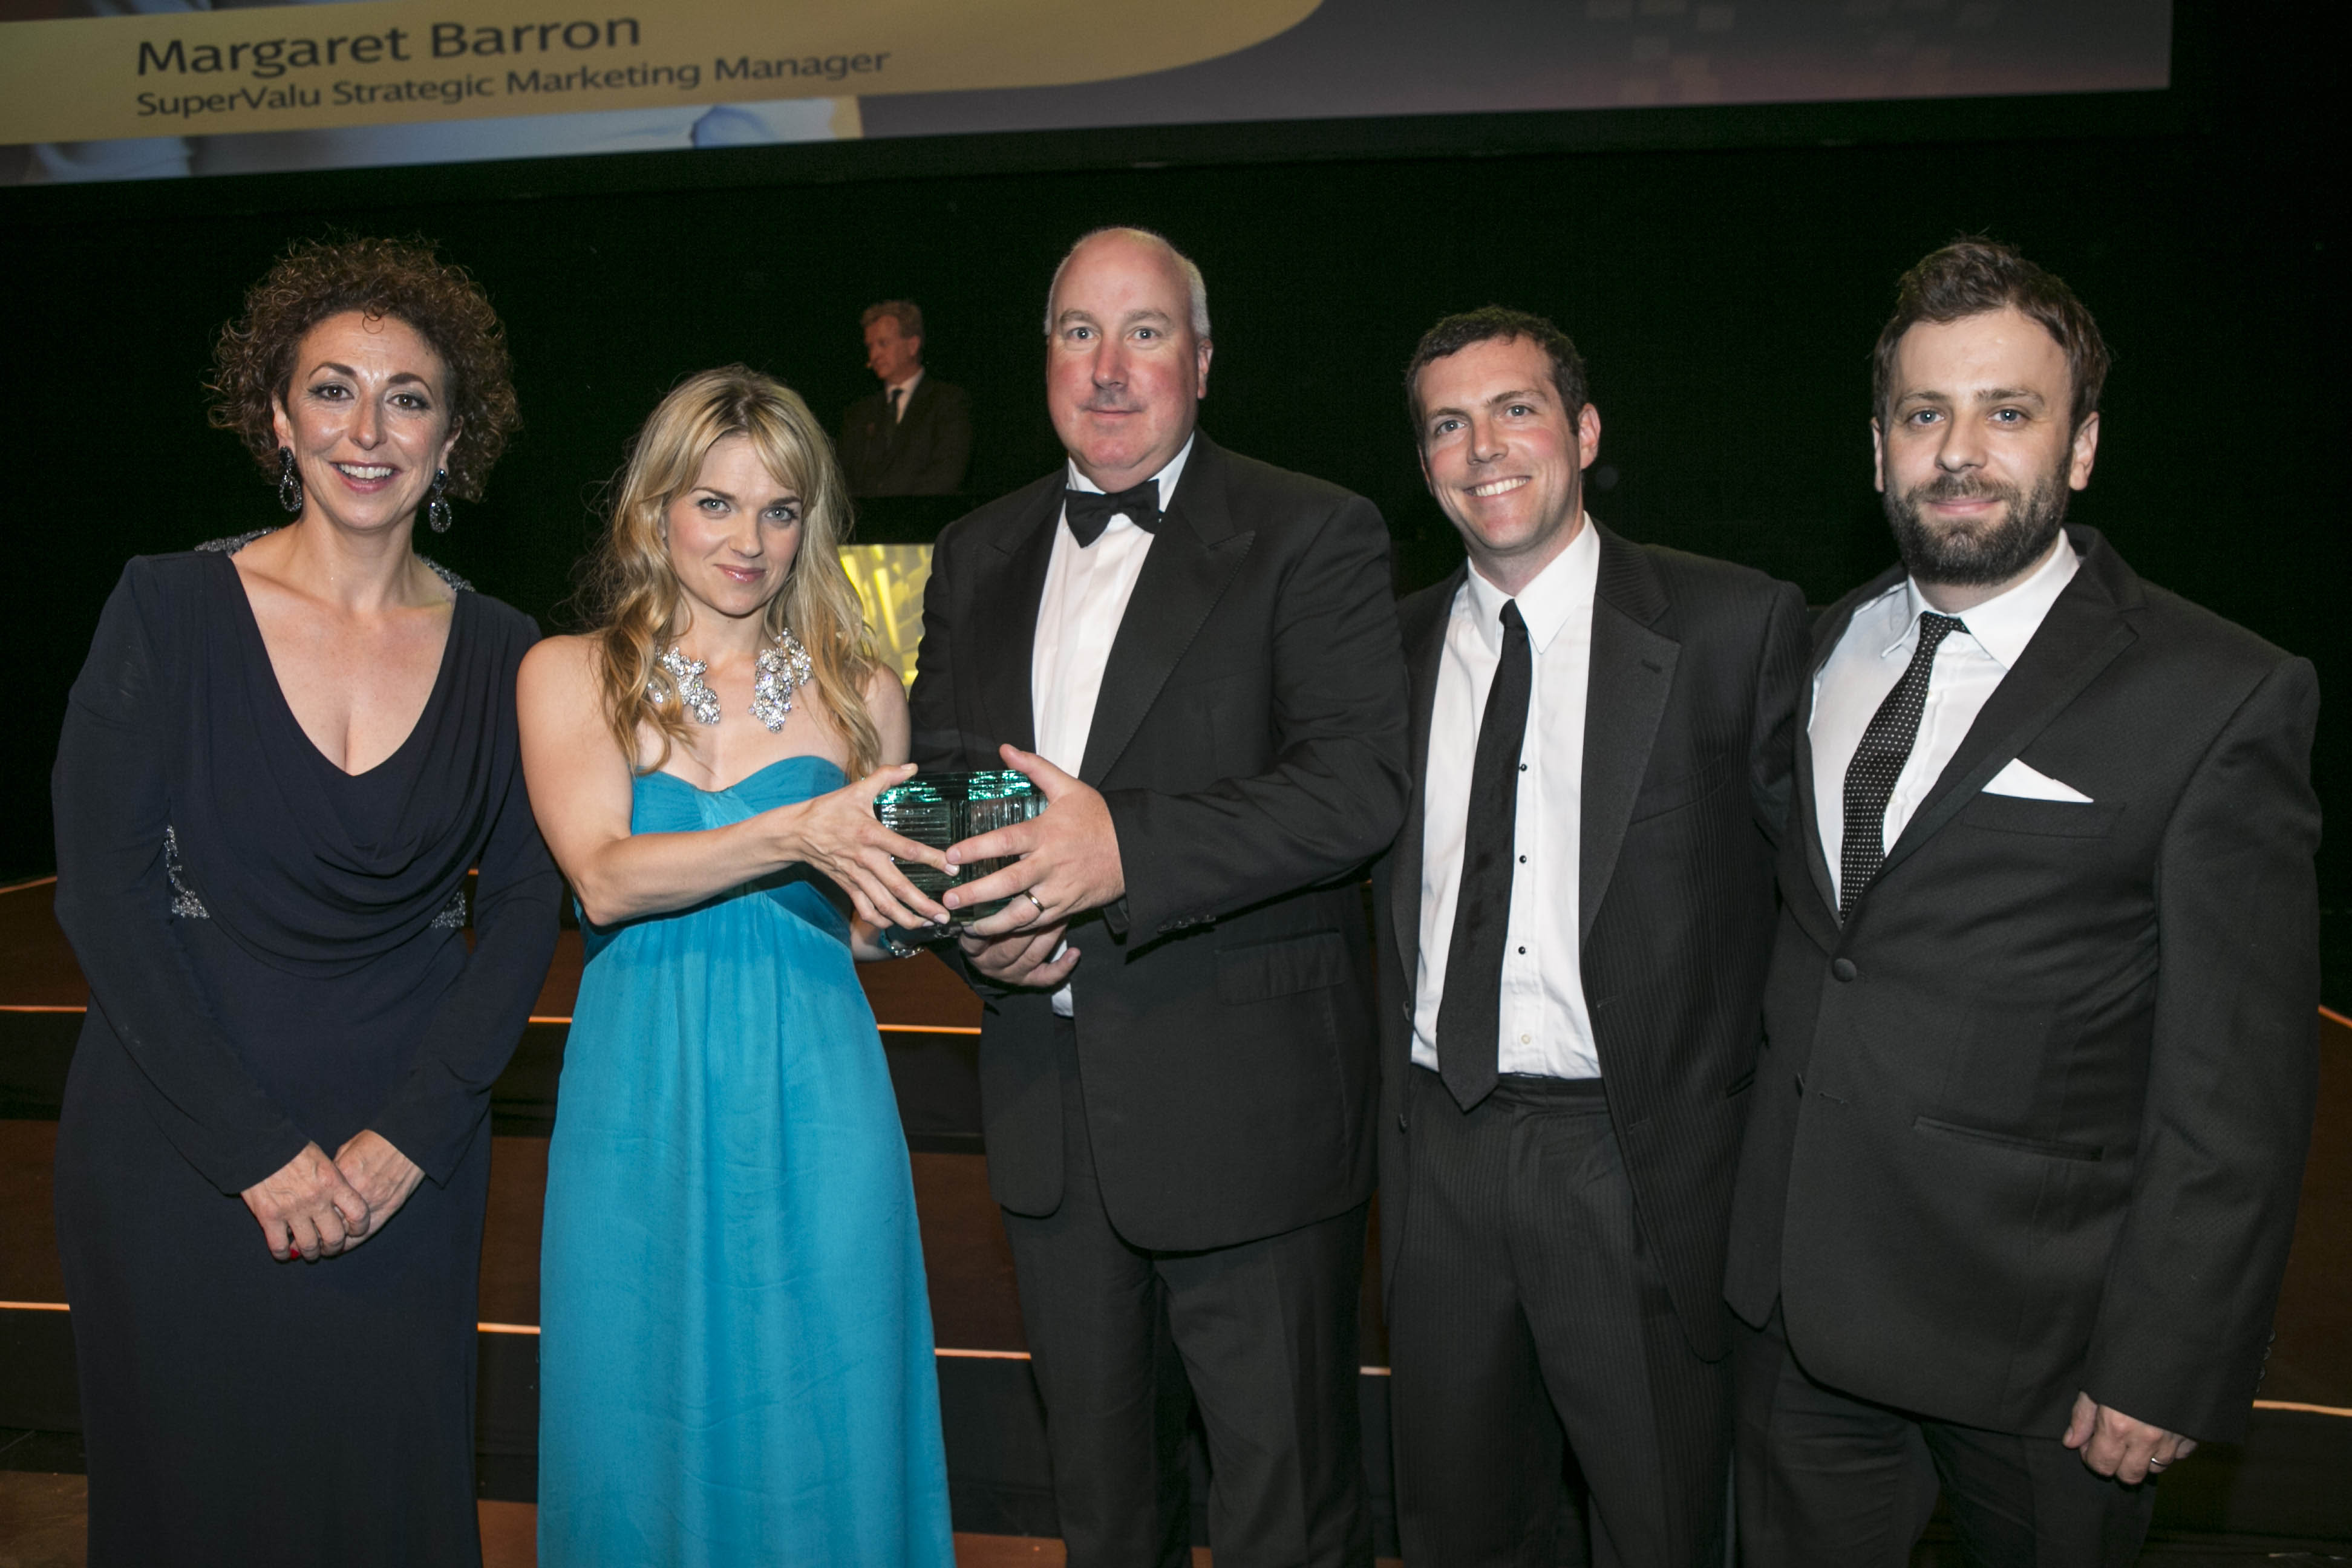 Receiving one of their awards at the Bord Gais Theatre are Tania Banotti CEO IAPI, Abi Moran from Target McConnell’s, Paul Candon from Topaz, Jason Nebenzahl from PHD and Paul Fisher from Target McConnell’s